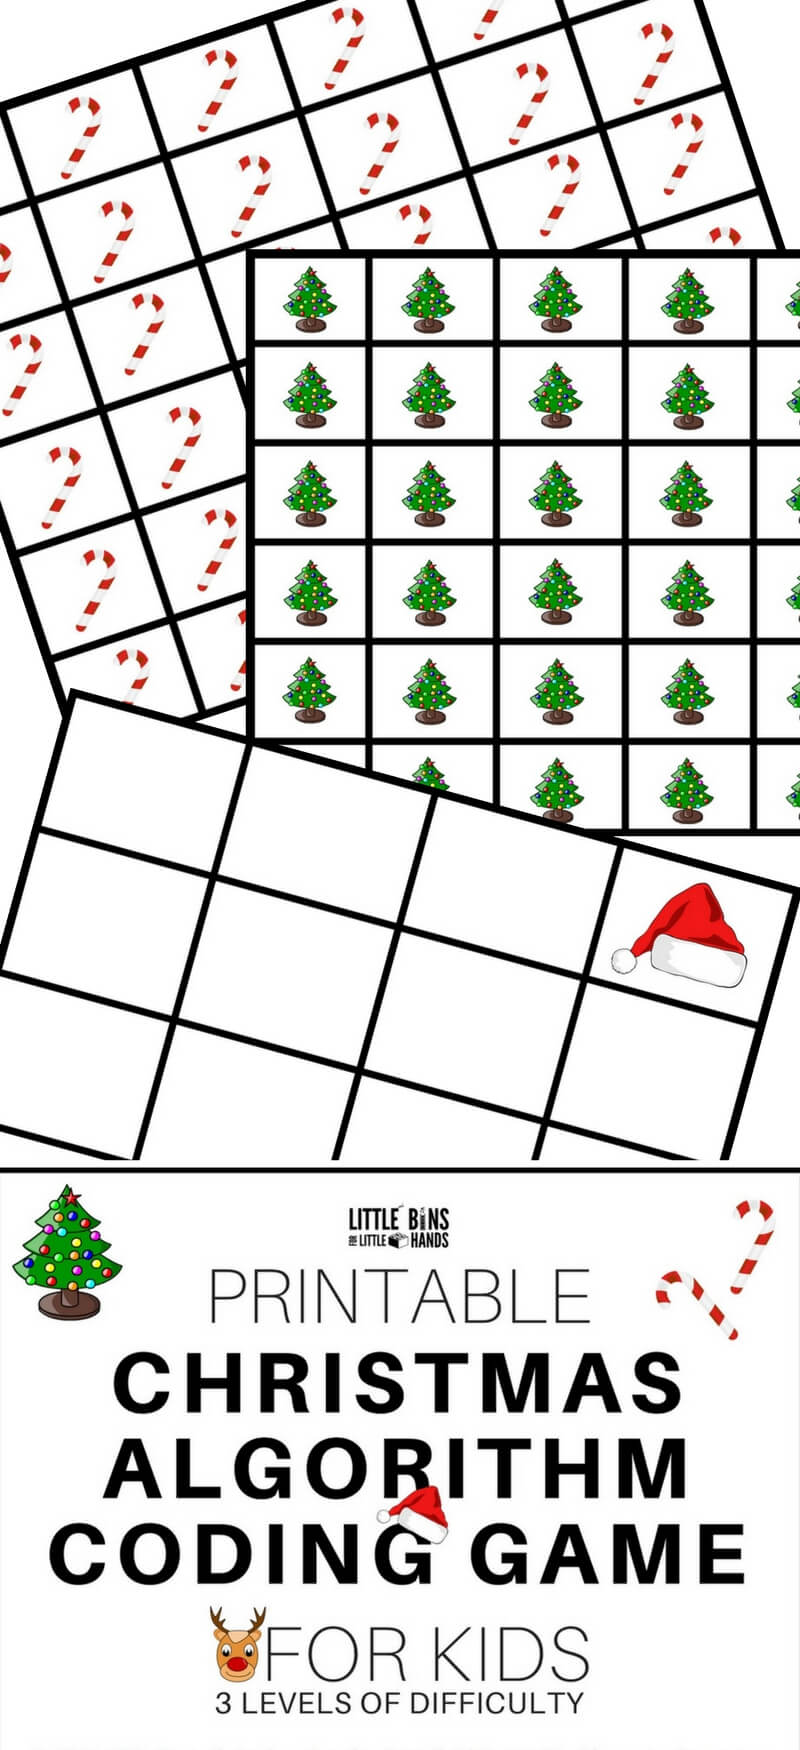 Computer coding for kids without the computer! Learn about algorithms with a simple, screen free printable Christmas coding STEM activity and game! We love easy to use holiday STEM activities and this is a perfect addition to our 25 Days of Christmas STEM countdown. Print out three different difficulty levels and have a blast with the kids. Easy science and STEM is what we want to share with you this year.